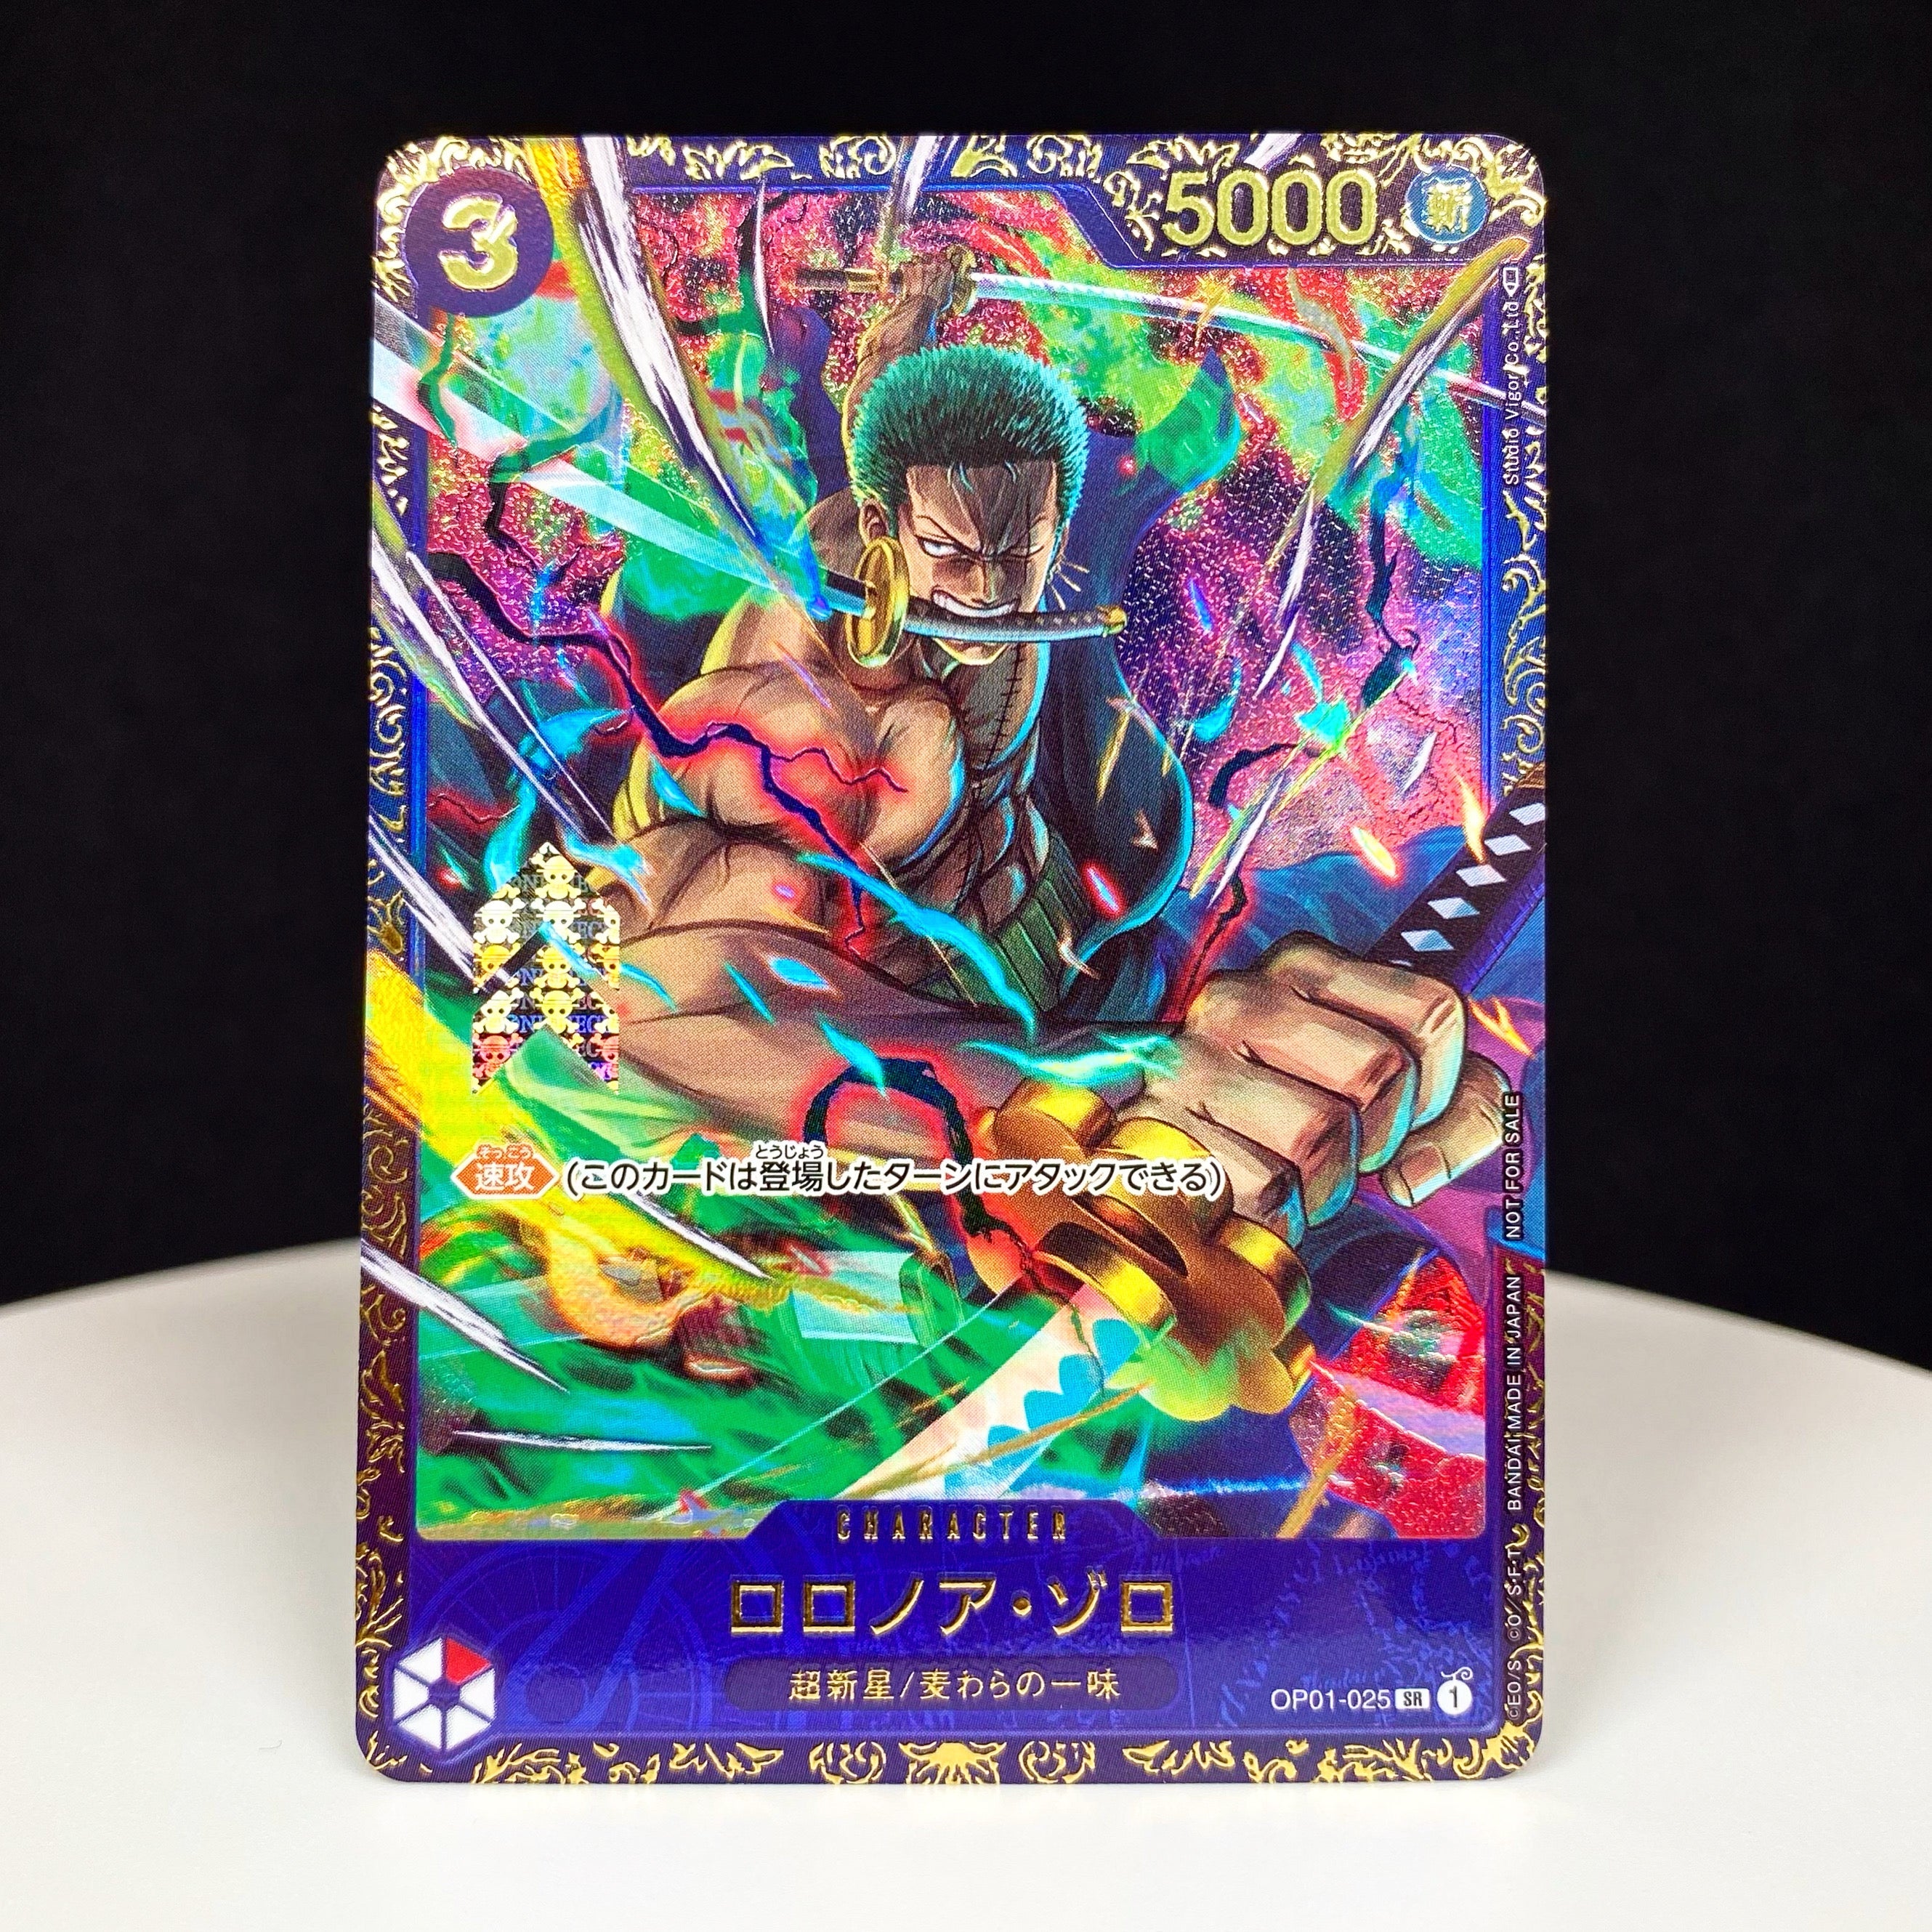 ONE PIECE CARD GAME OP01-025 SR Parallel (Flagship Battle Limited)  ONE PIECE CARD GAME ｢ZORO FLAGSHIP｣  Release date: February 2023  Very limited item from IRL Standard Battle event / Flagship Battle / Zoro